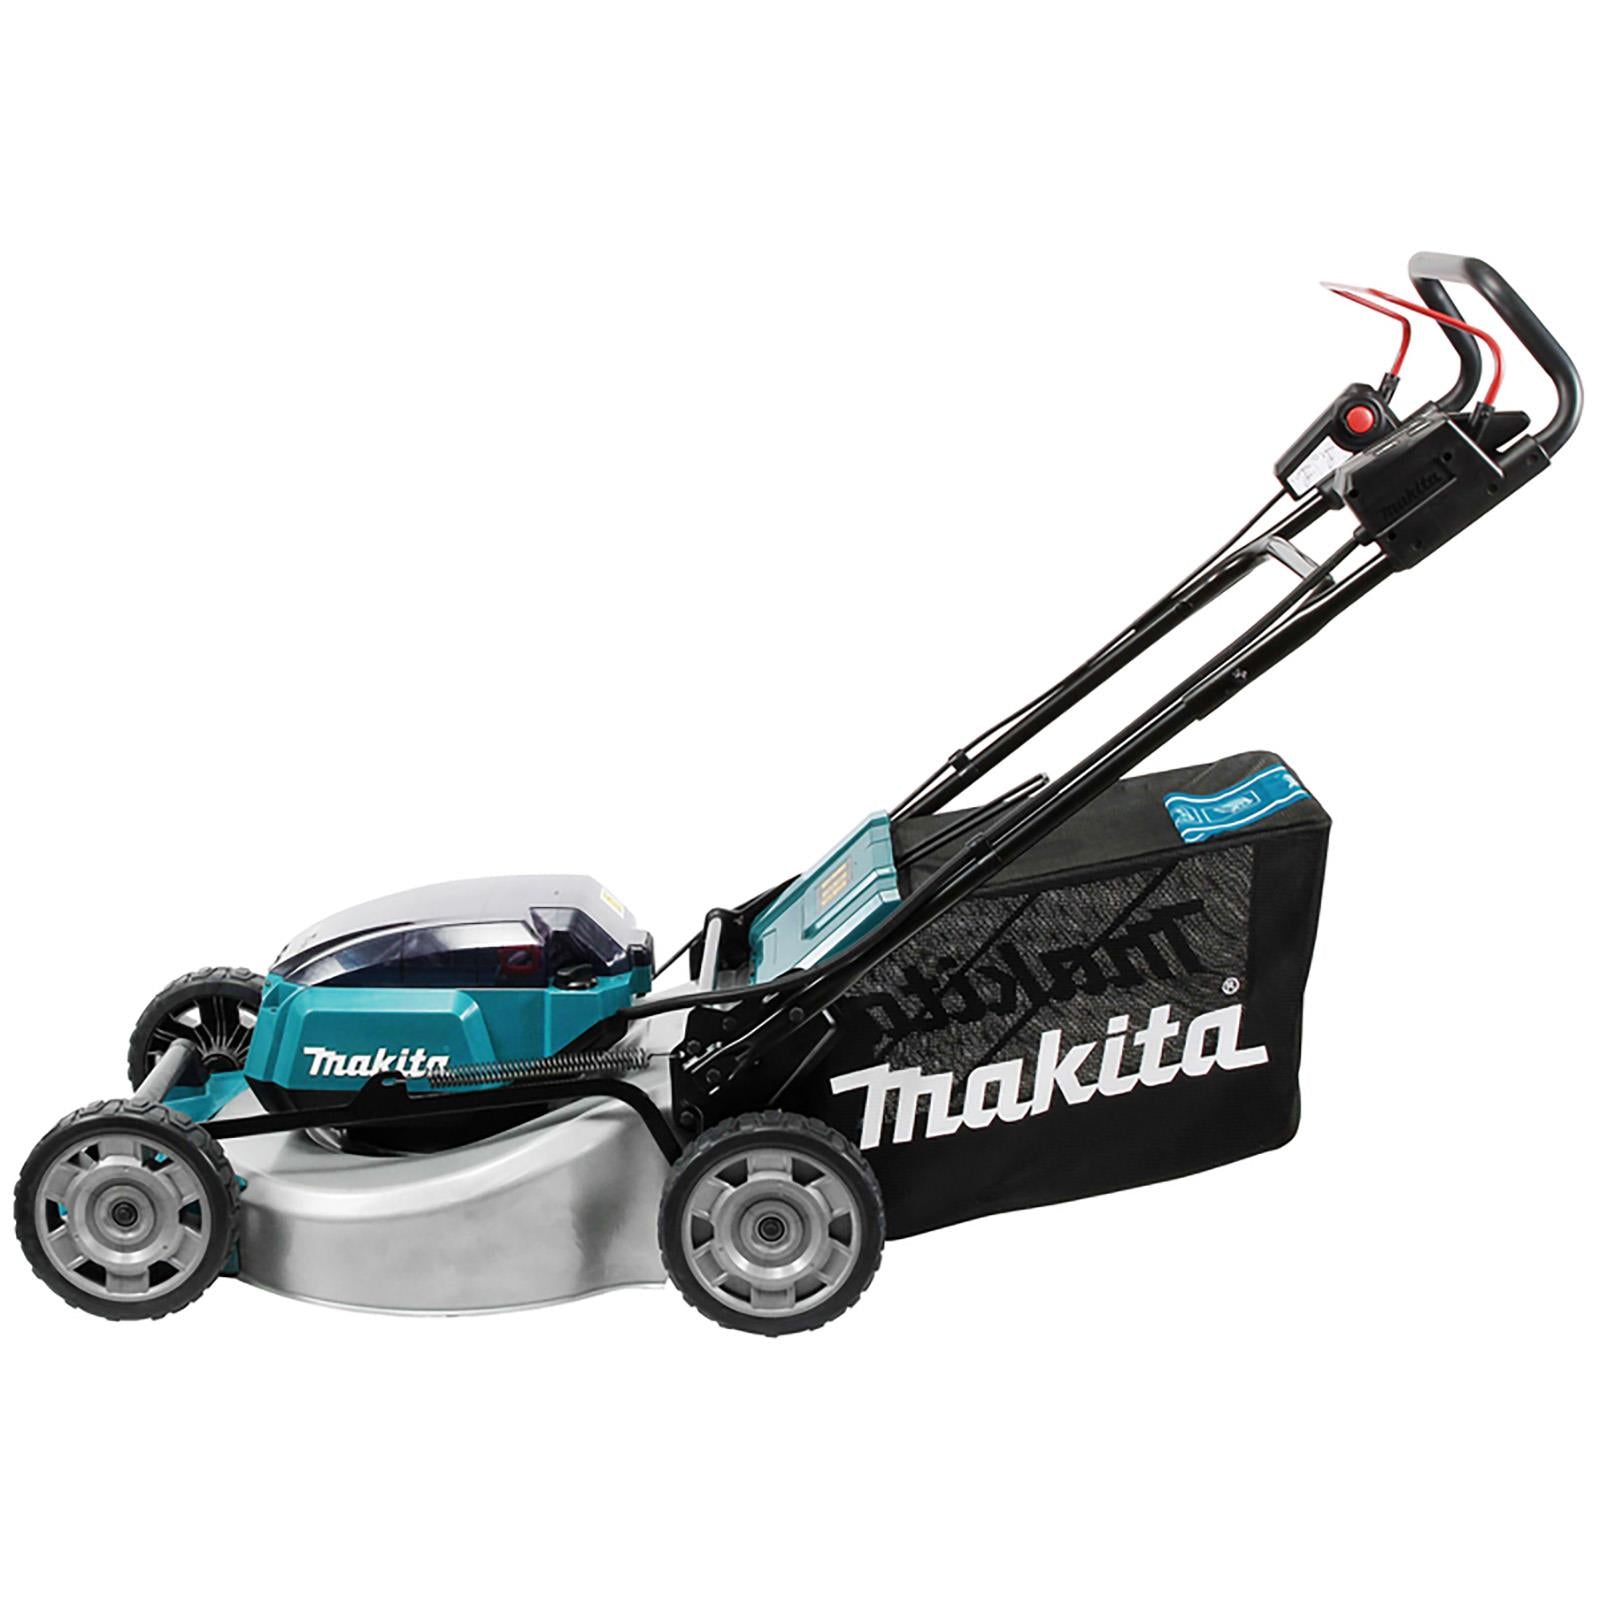 Makita 53cm Lawn Mower Kit Twin 18V LXT Li-ion Cordless Garden Grass Outdoor 2 x 6Ah Battery and Dual Rapid Charger DLM530PG2